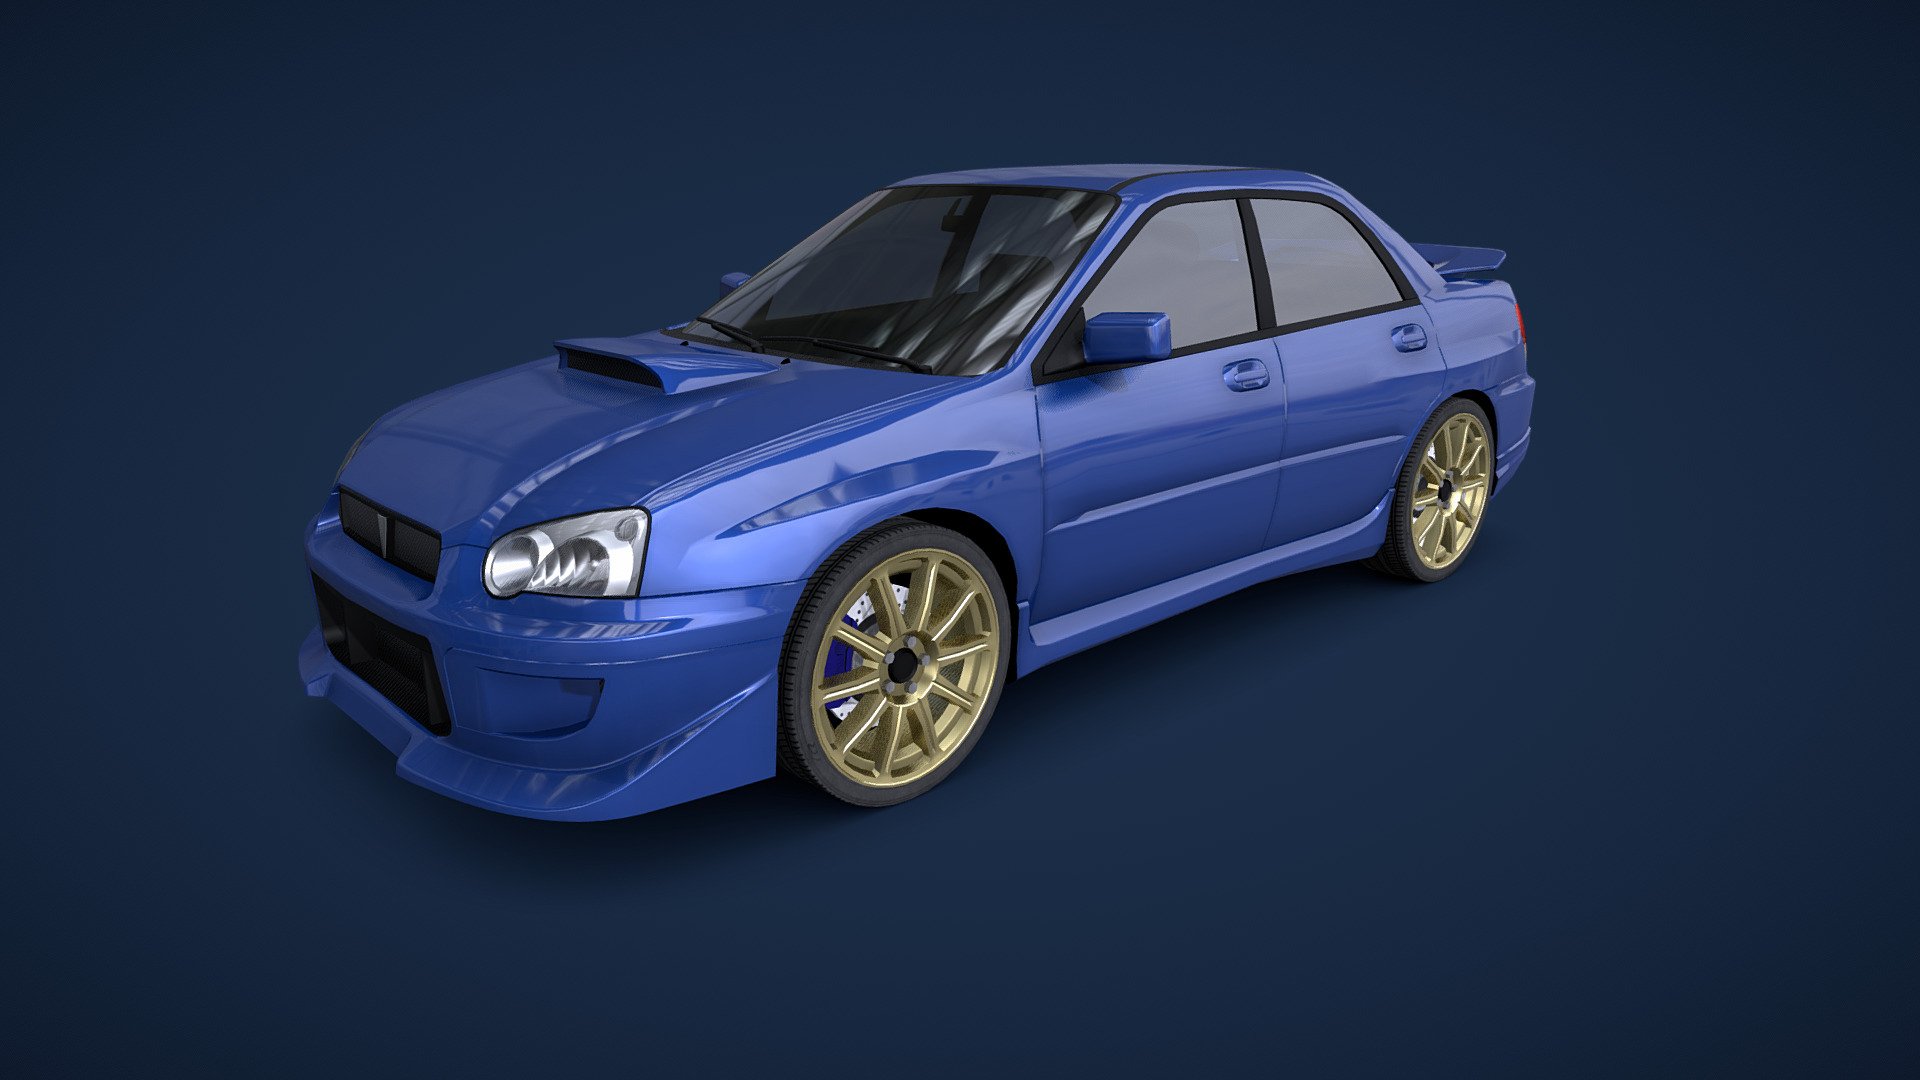 Midpoly model of an generic rally sedan

Free to use. Please remember to post me in credits or tag on instagram instagram.com/mk2.design/ - Generic Toyama XR Sedan - Download Free 3D model by mk2design 3d model